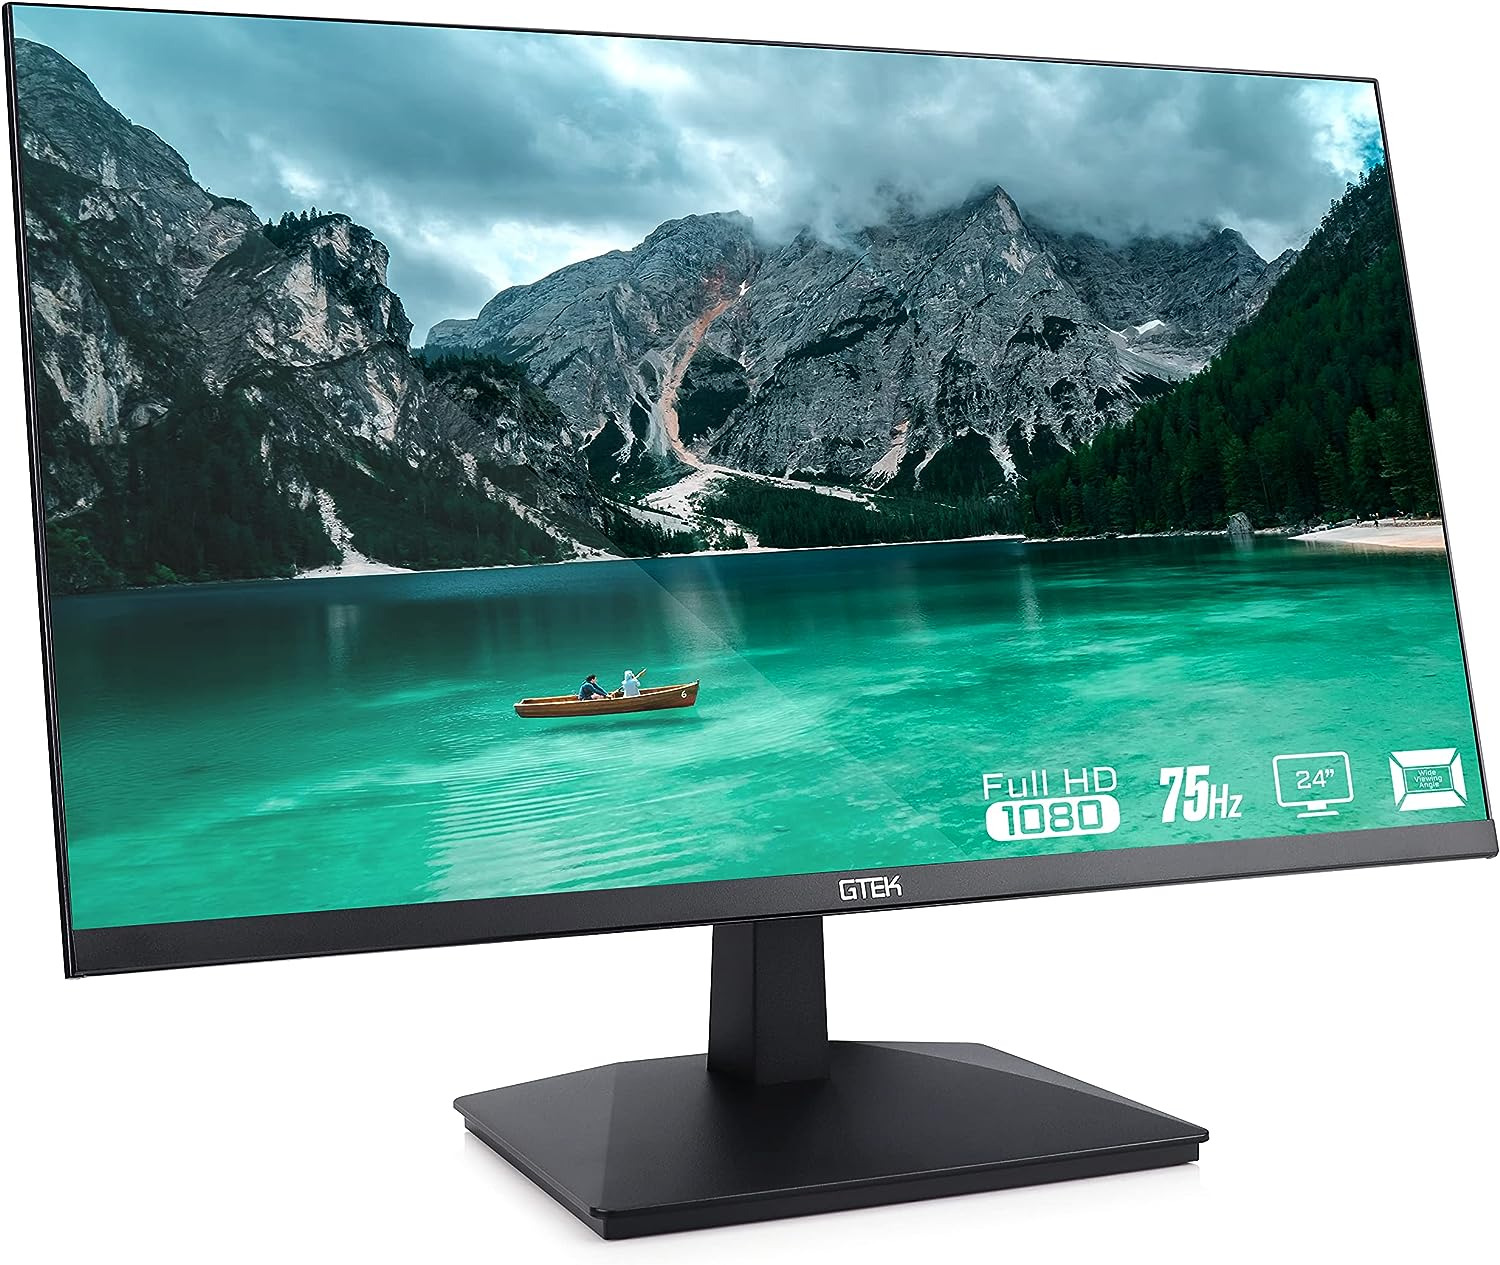 24 Inch 75Hz Computer Monitor Frameless, FHD 1080P LED Display, Office Professio